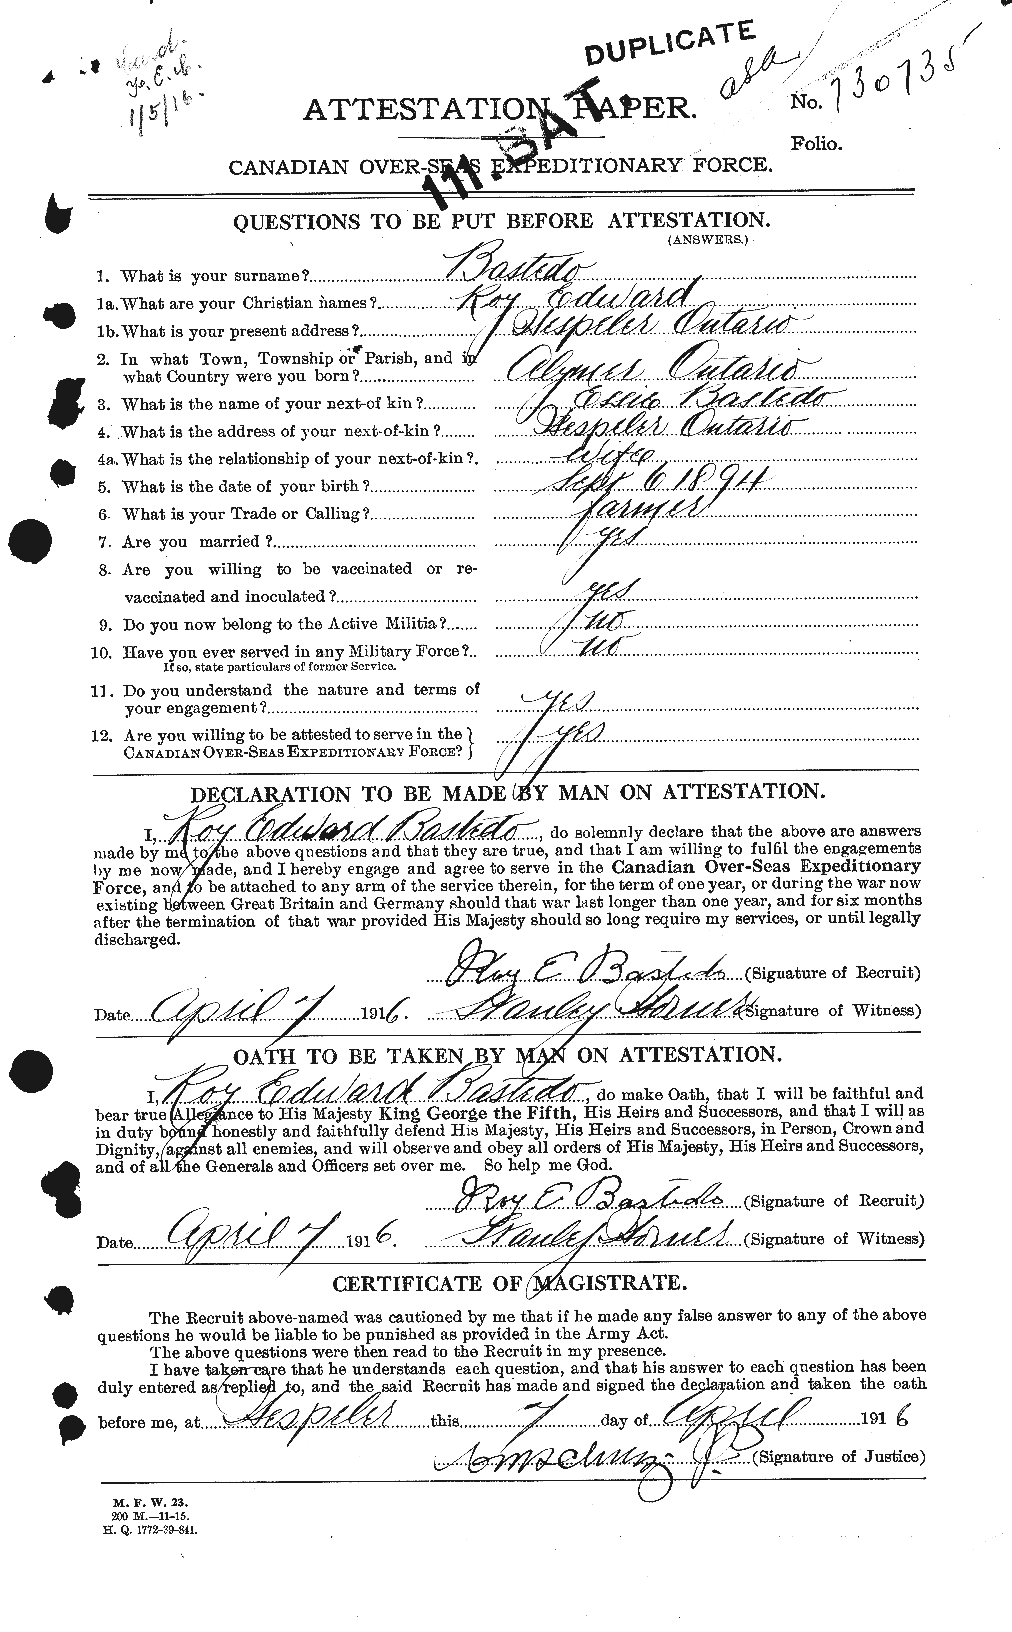 Personnel Records of the First World War - CEF 228264a